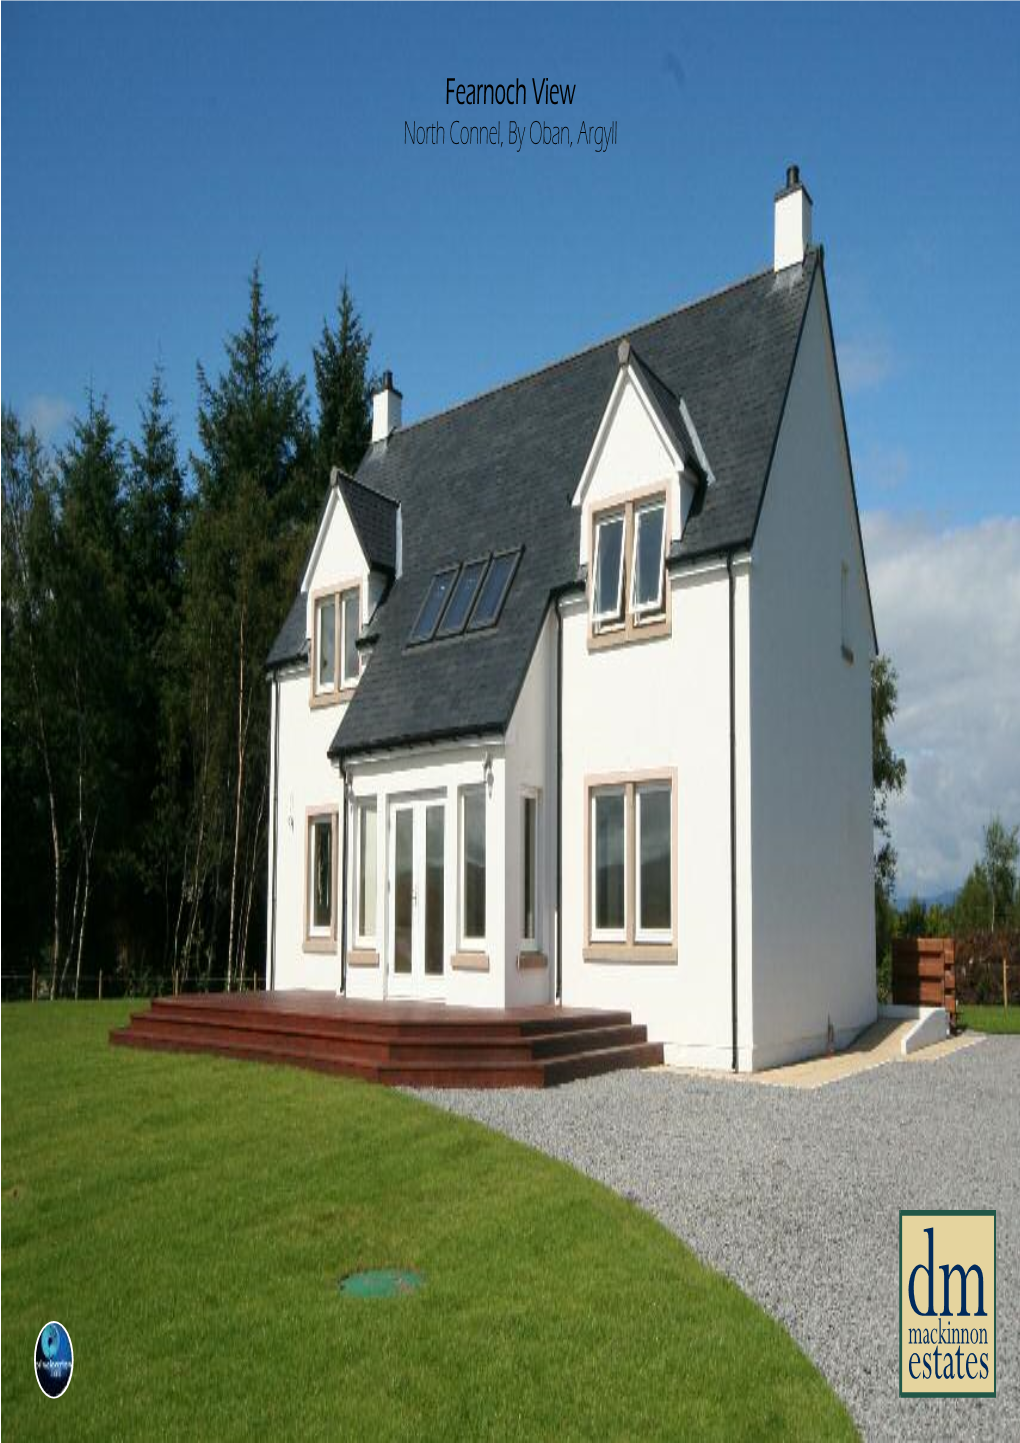 Fearnoch View North Connel, by Oban, Argyll 2 Fearnoch View, North Connel, Argyll Offers Over £395,000